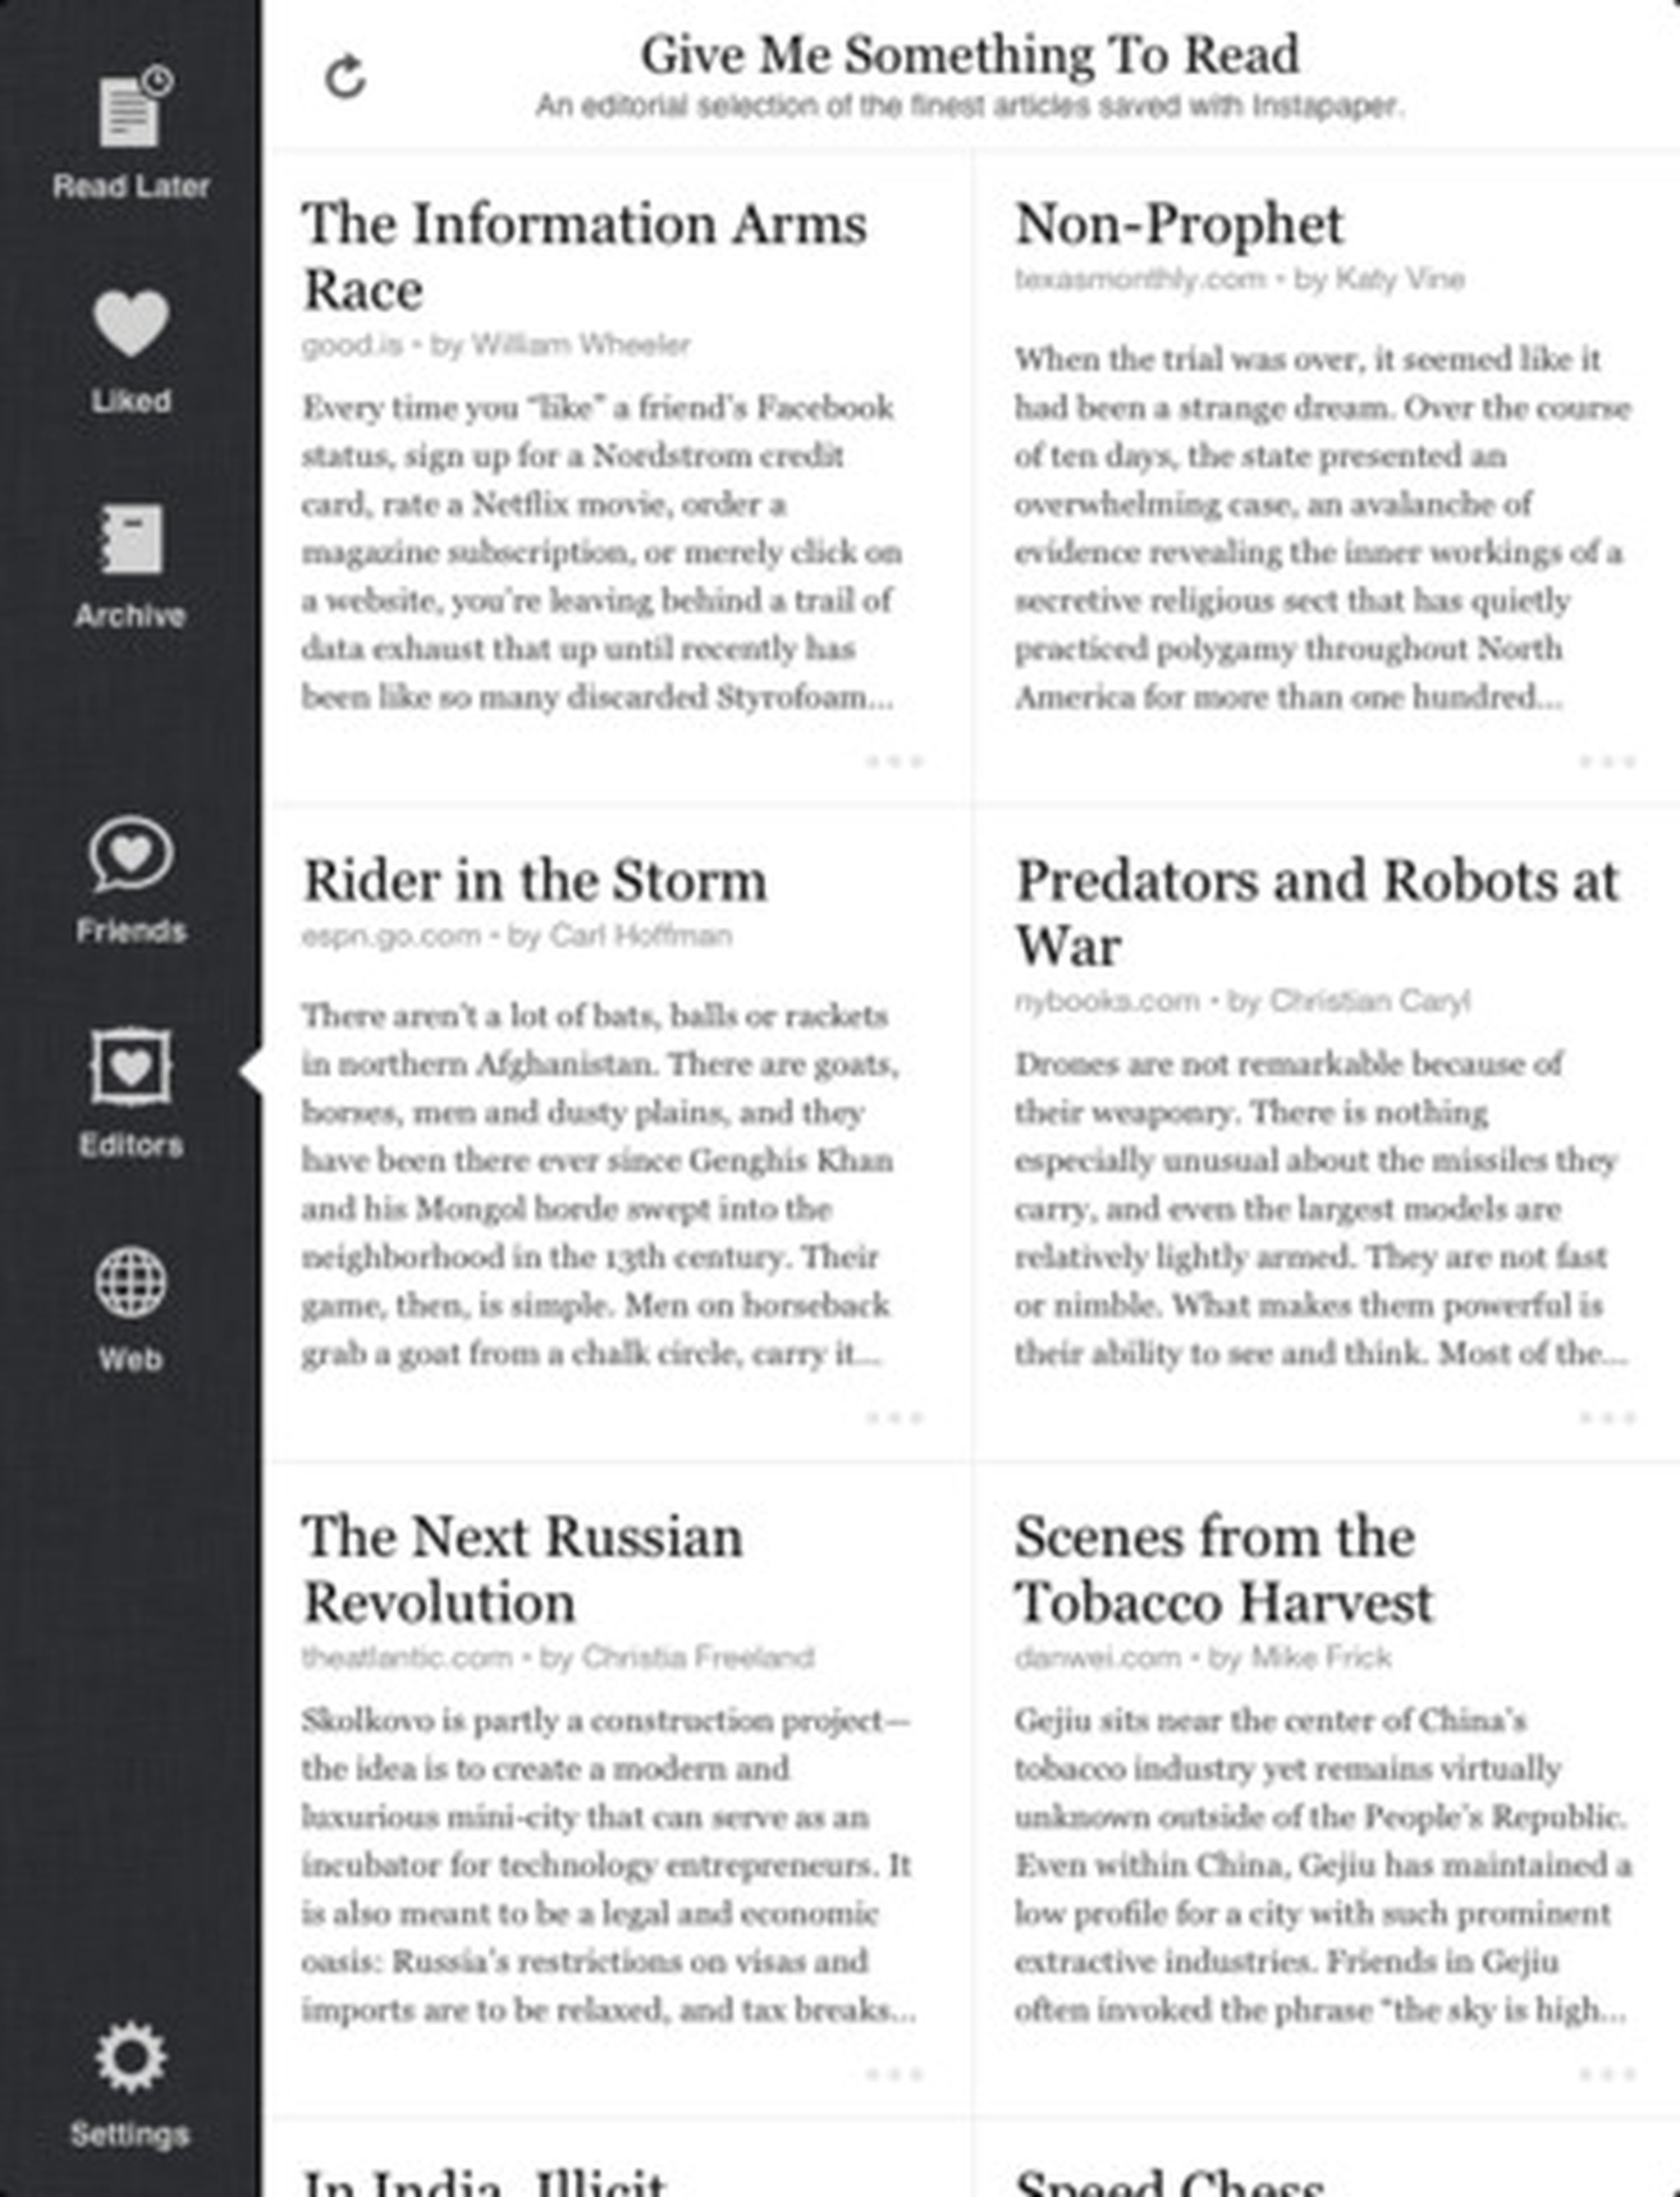 Instapaper 4.0 for iPad and iPhone